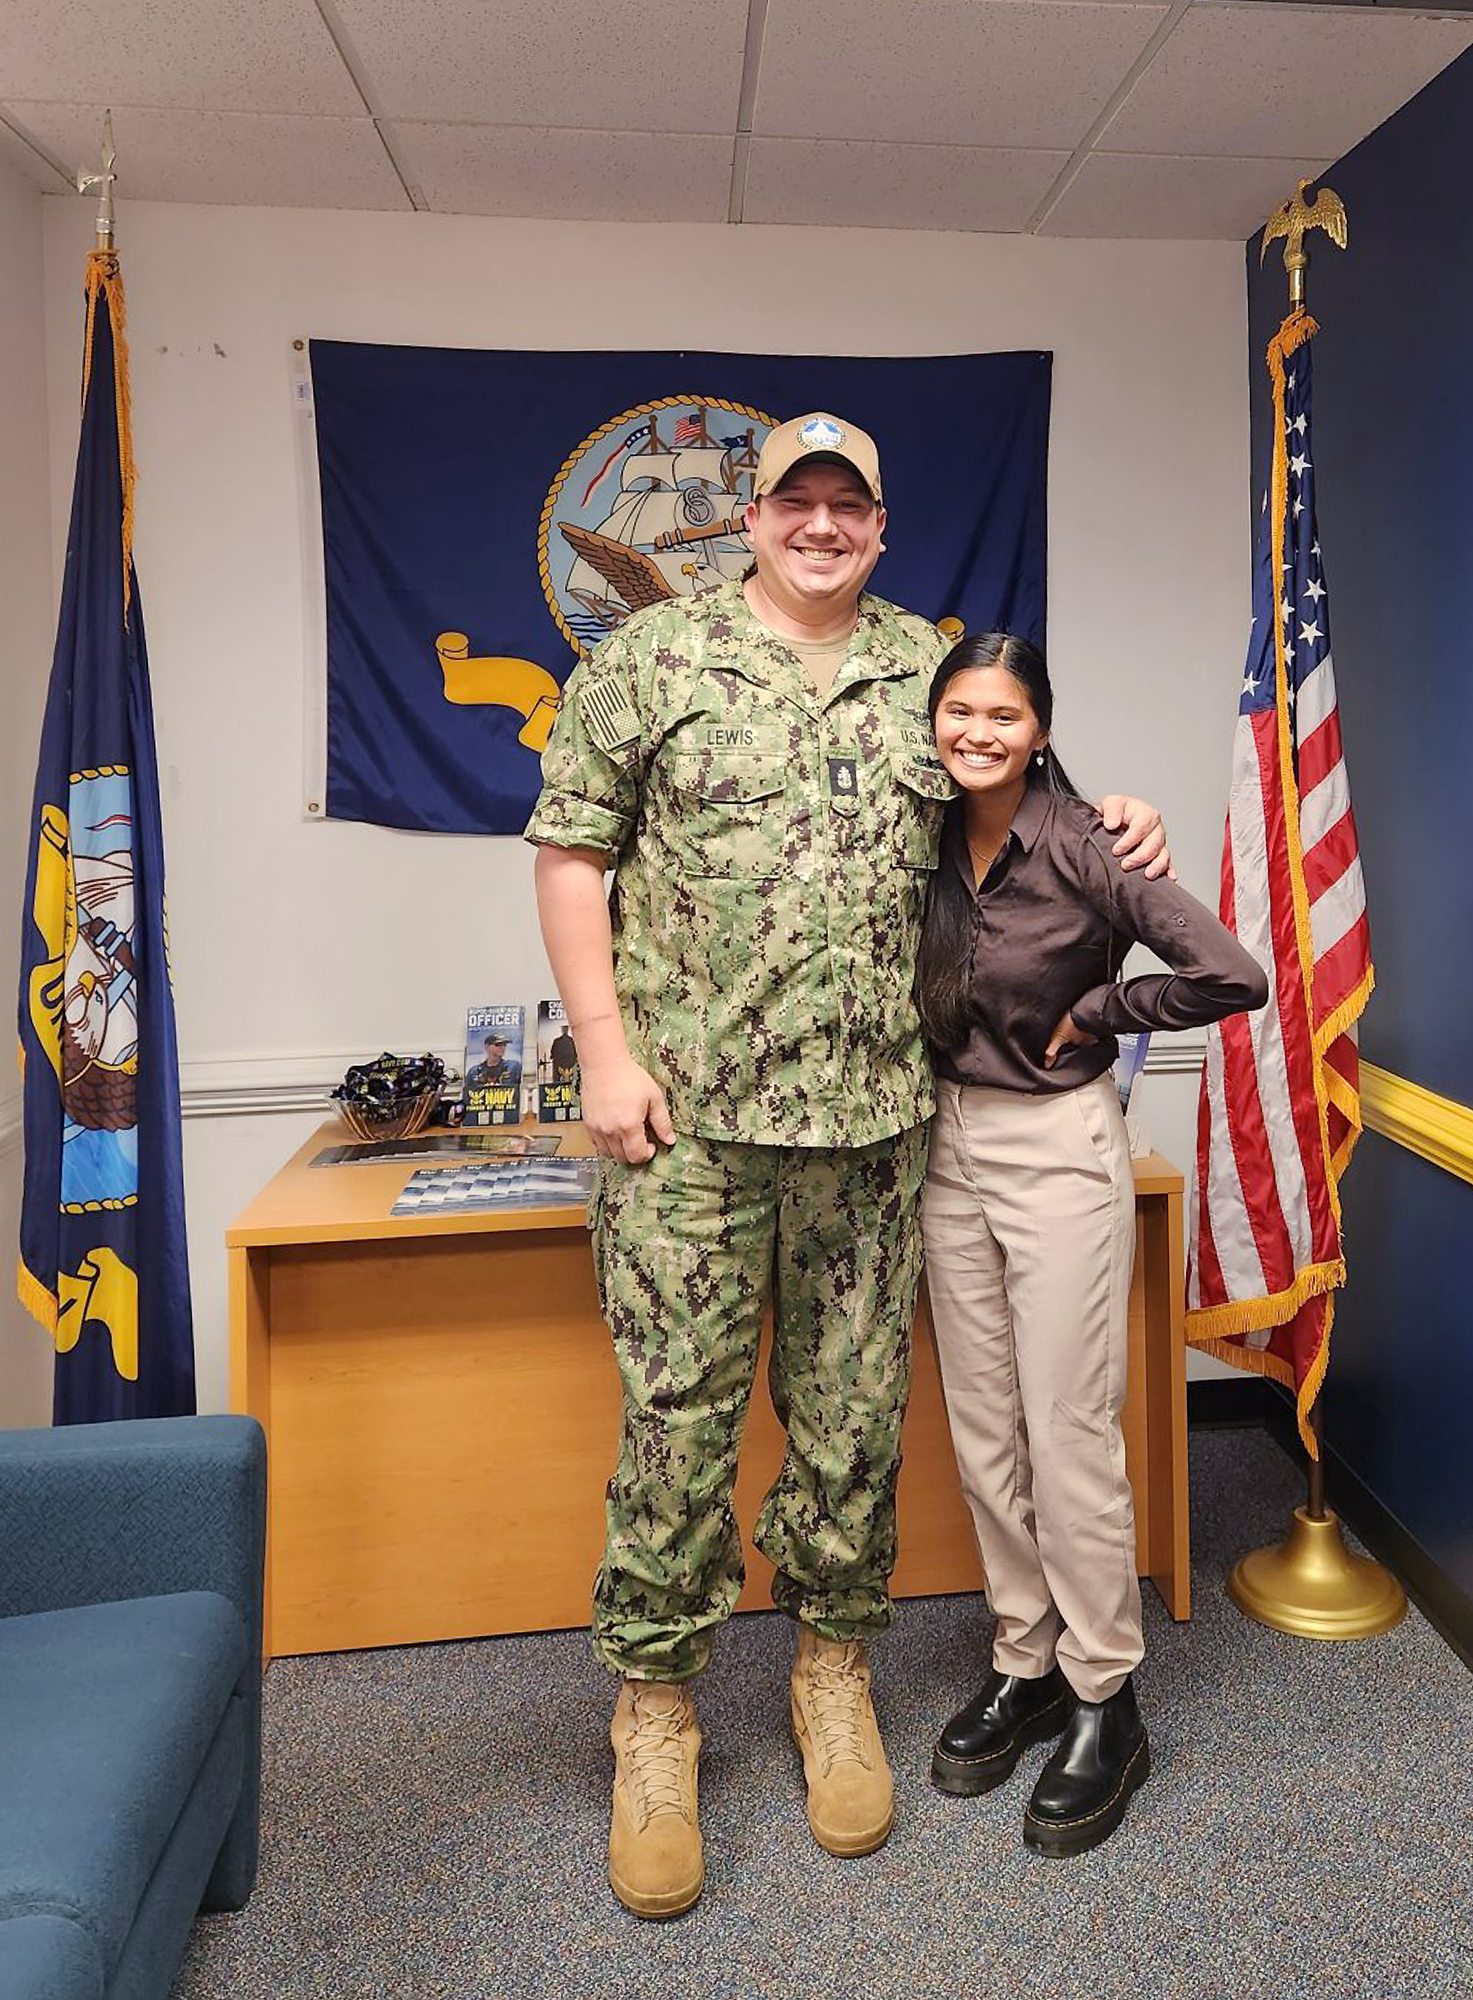 Tall man in a military uniform stands with woman in recruiting office